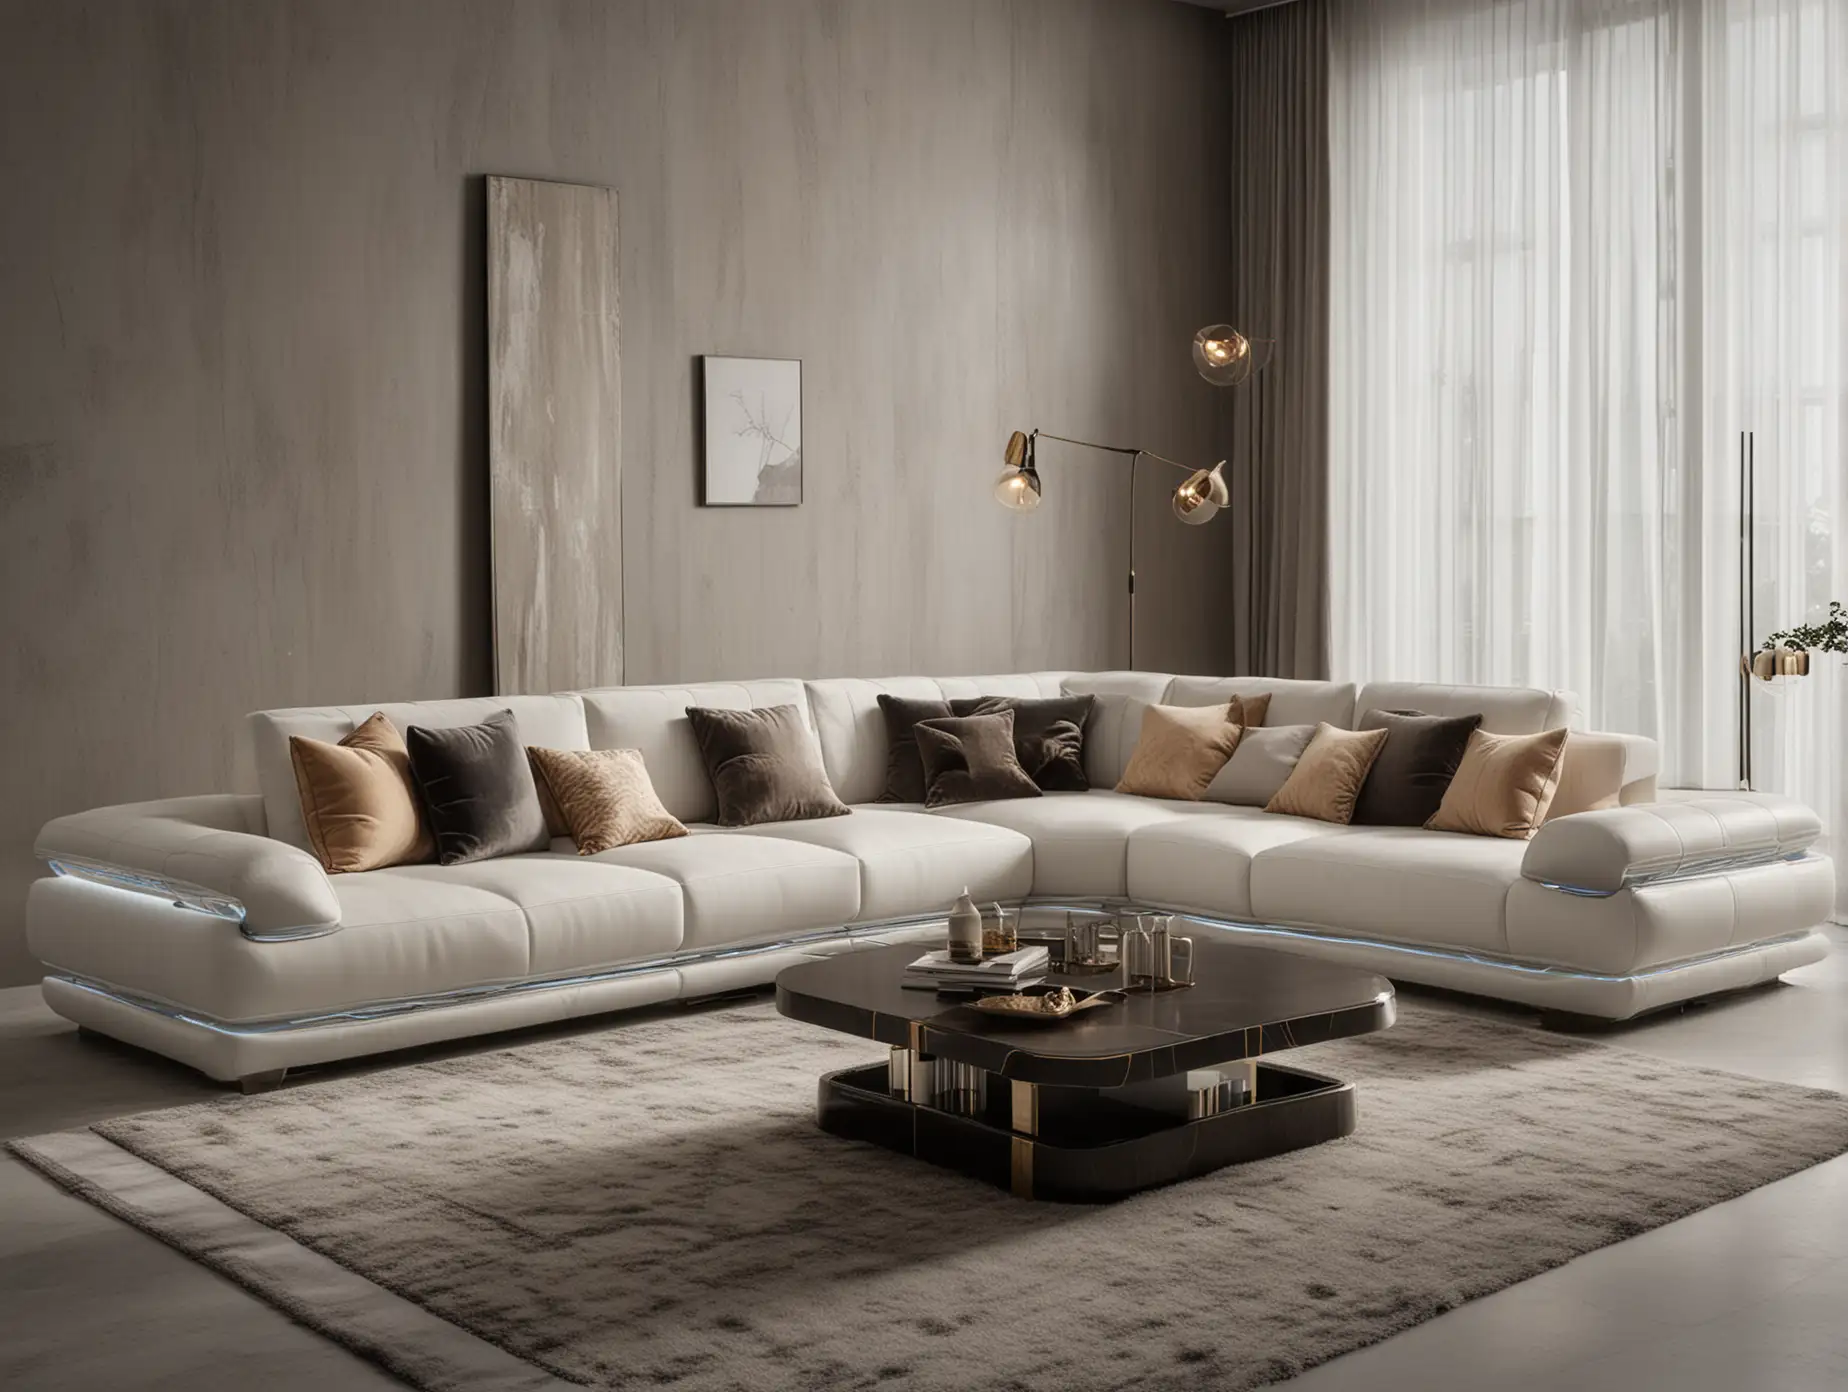 Modern Italian Sofa with Turkish Design Influences and LED Accents